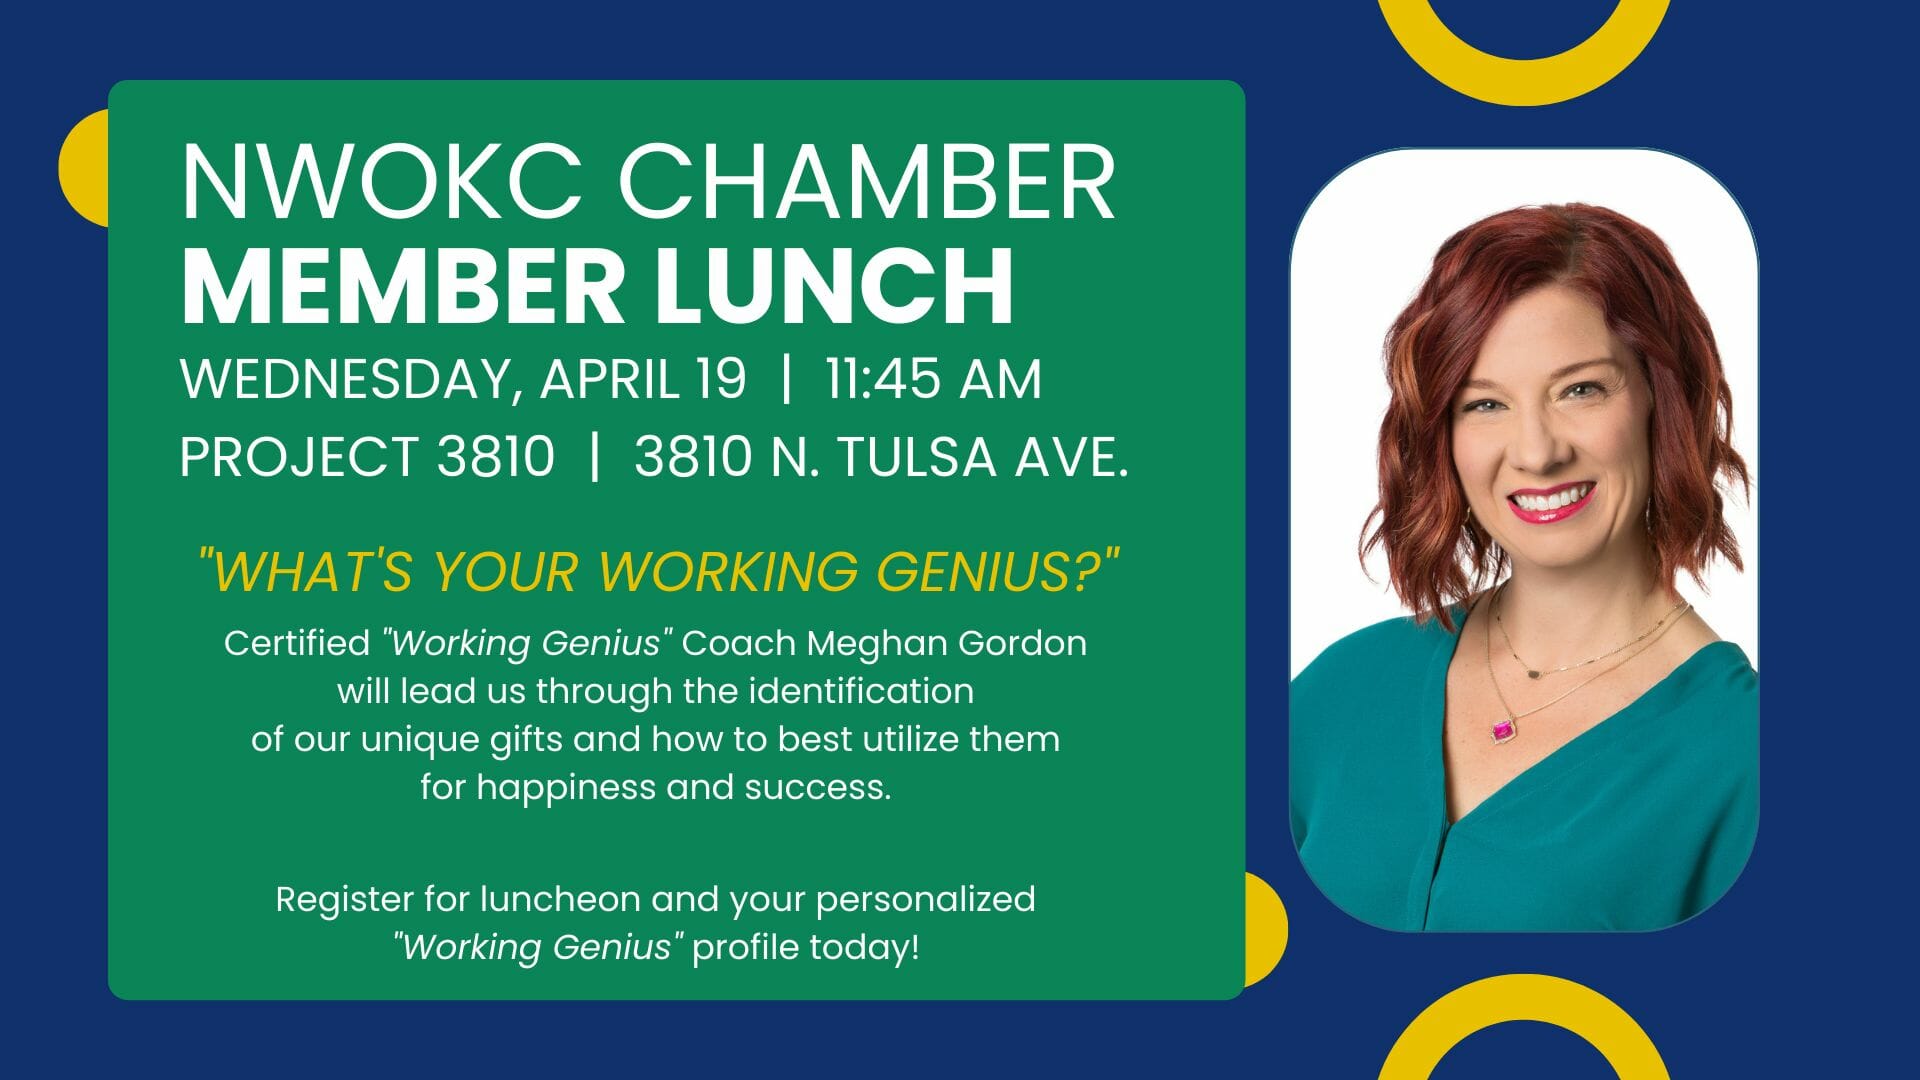 What's Your Working Genius? Learn at the April Member Lunch 